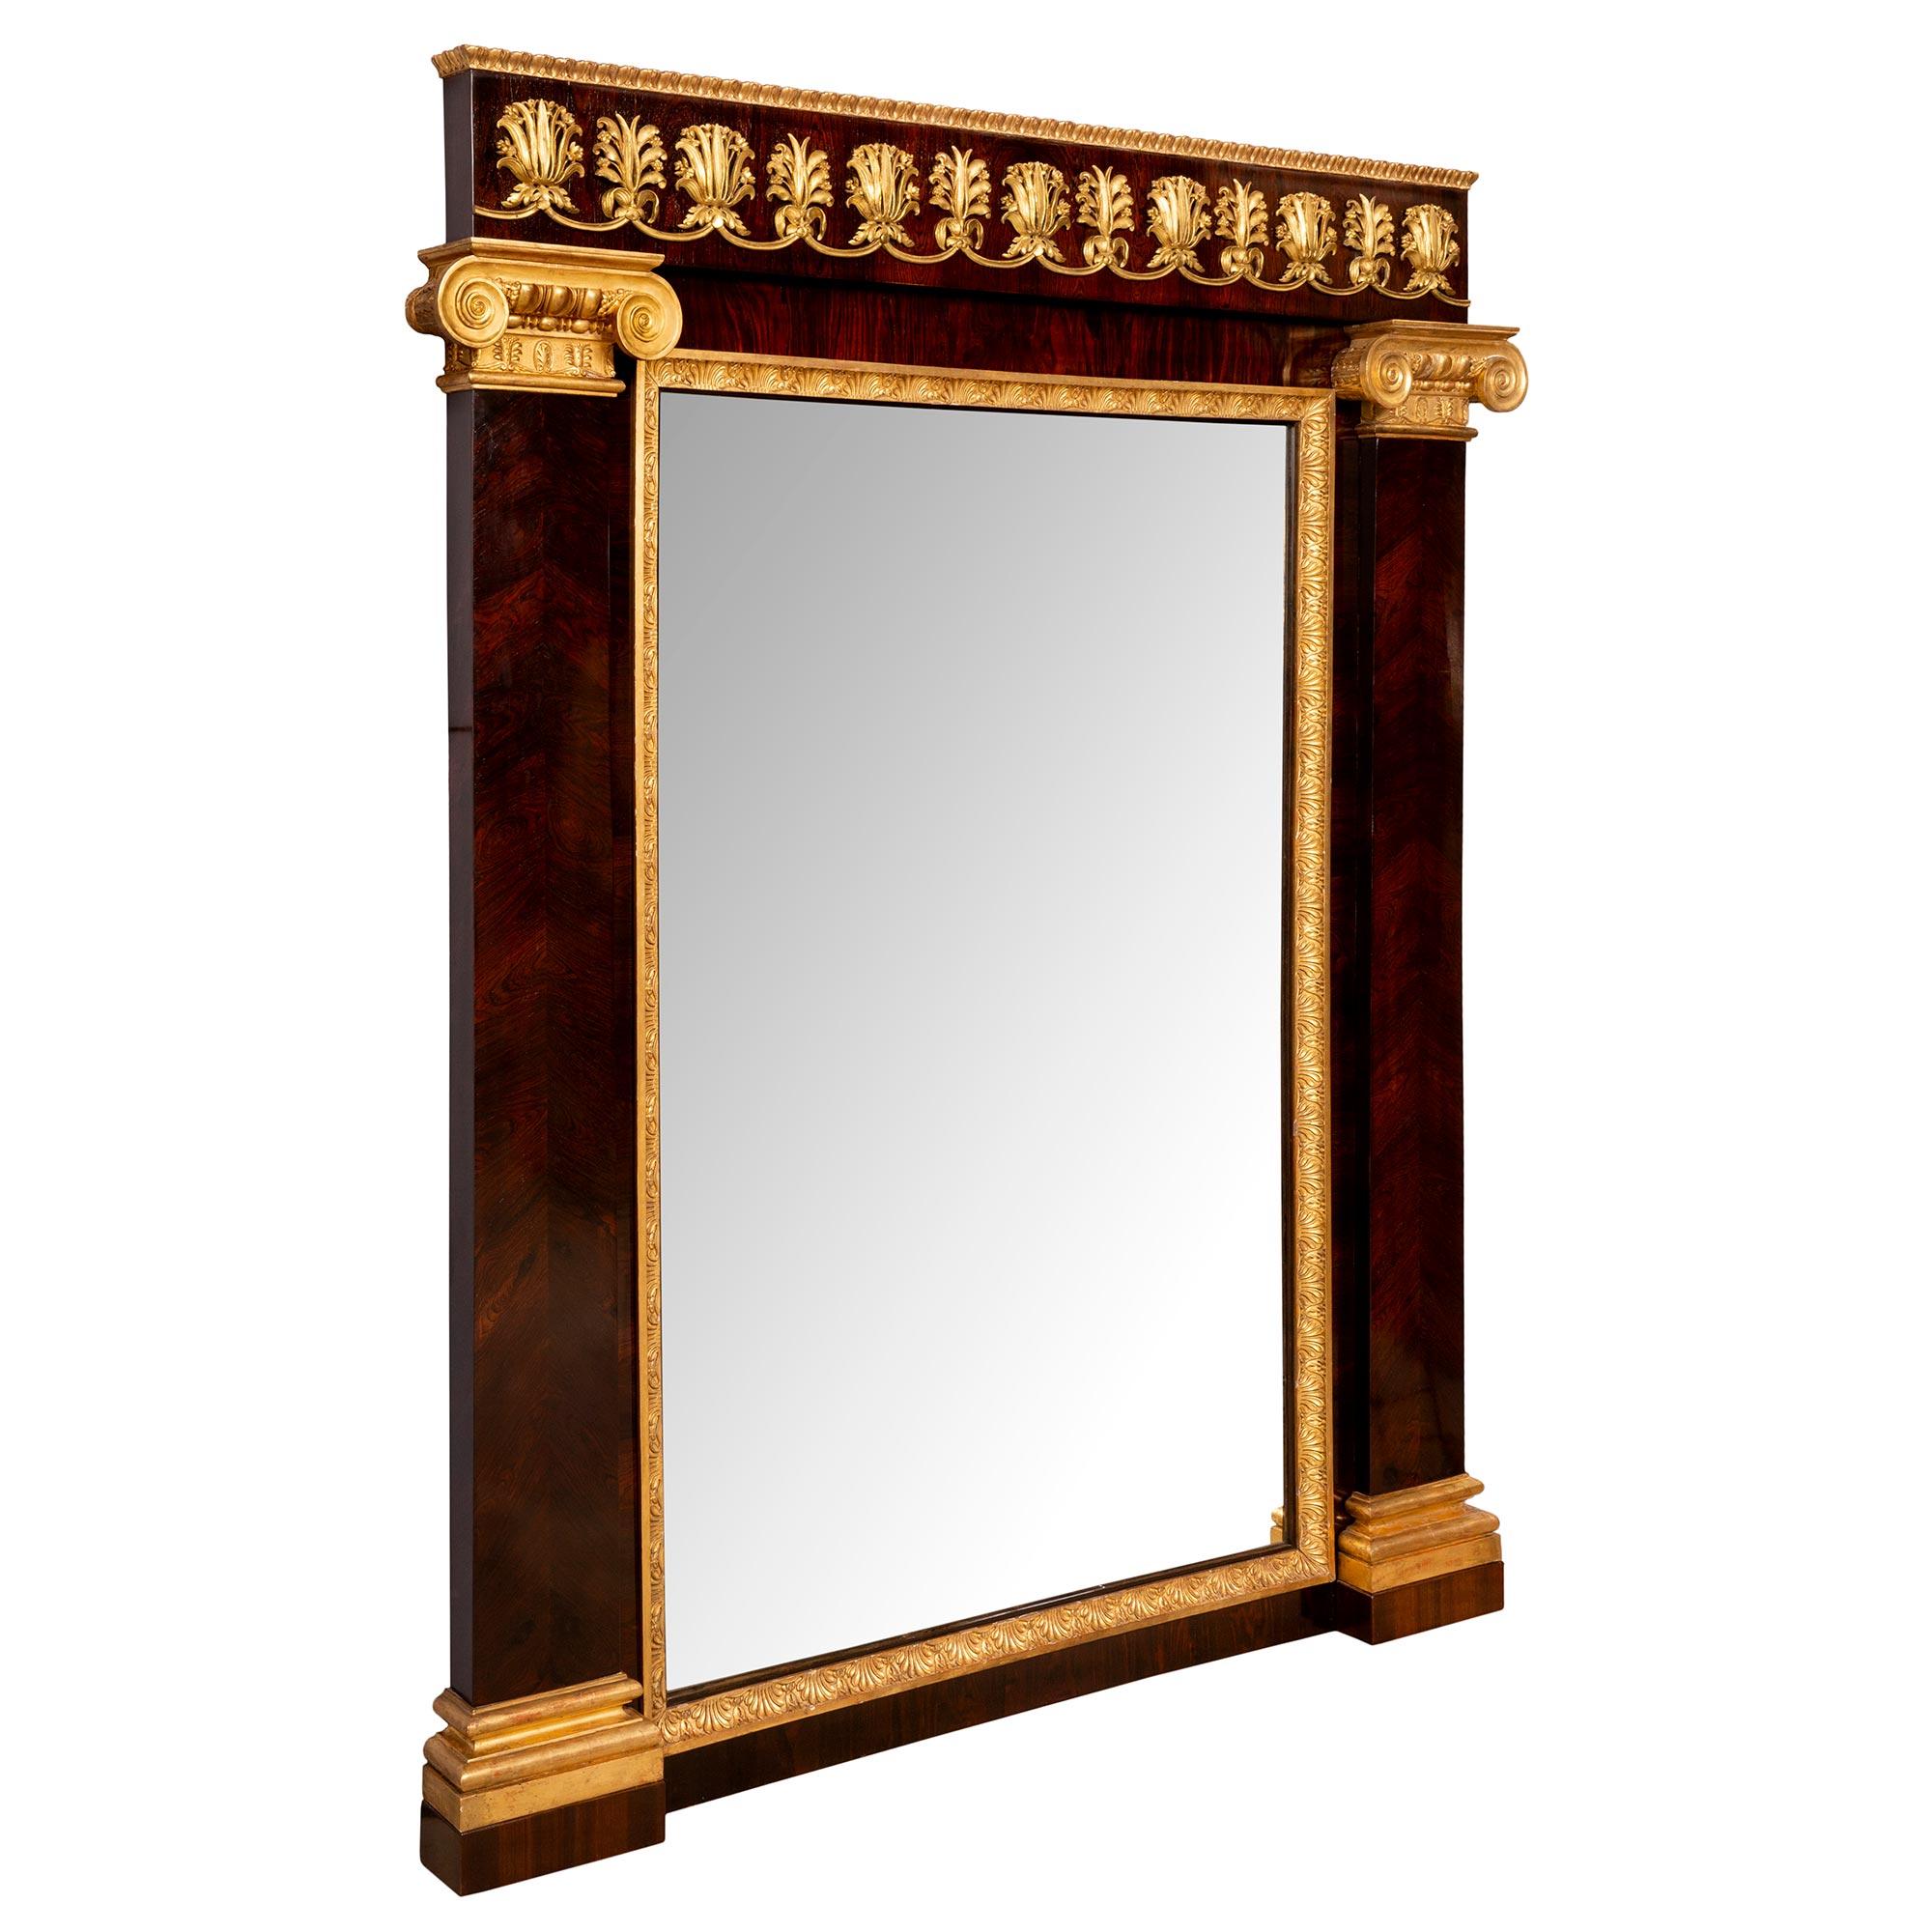 Italian Mid-19th Century Neoclassical Style Rosewood and Giltwood Mirror In Good Condition For Sale In West Palm Beach, FL